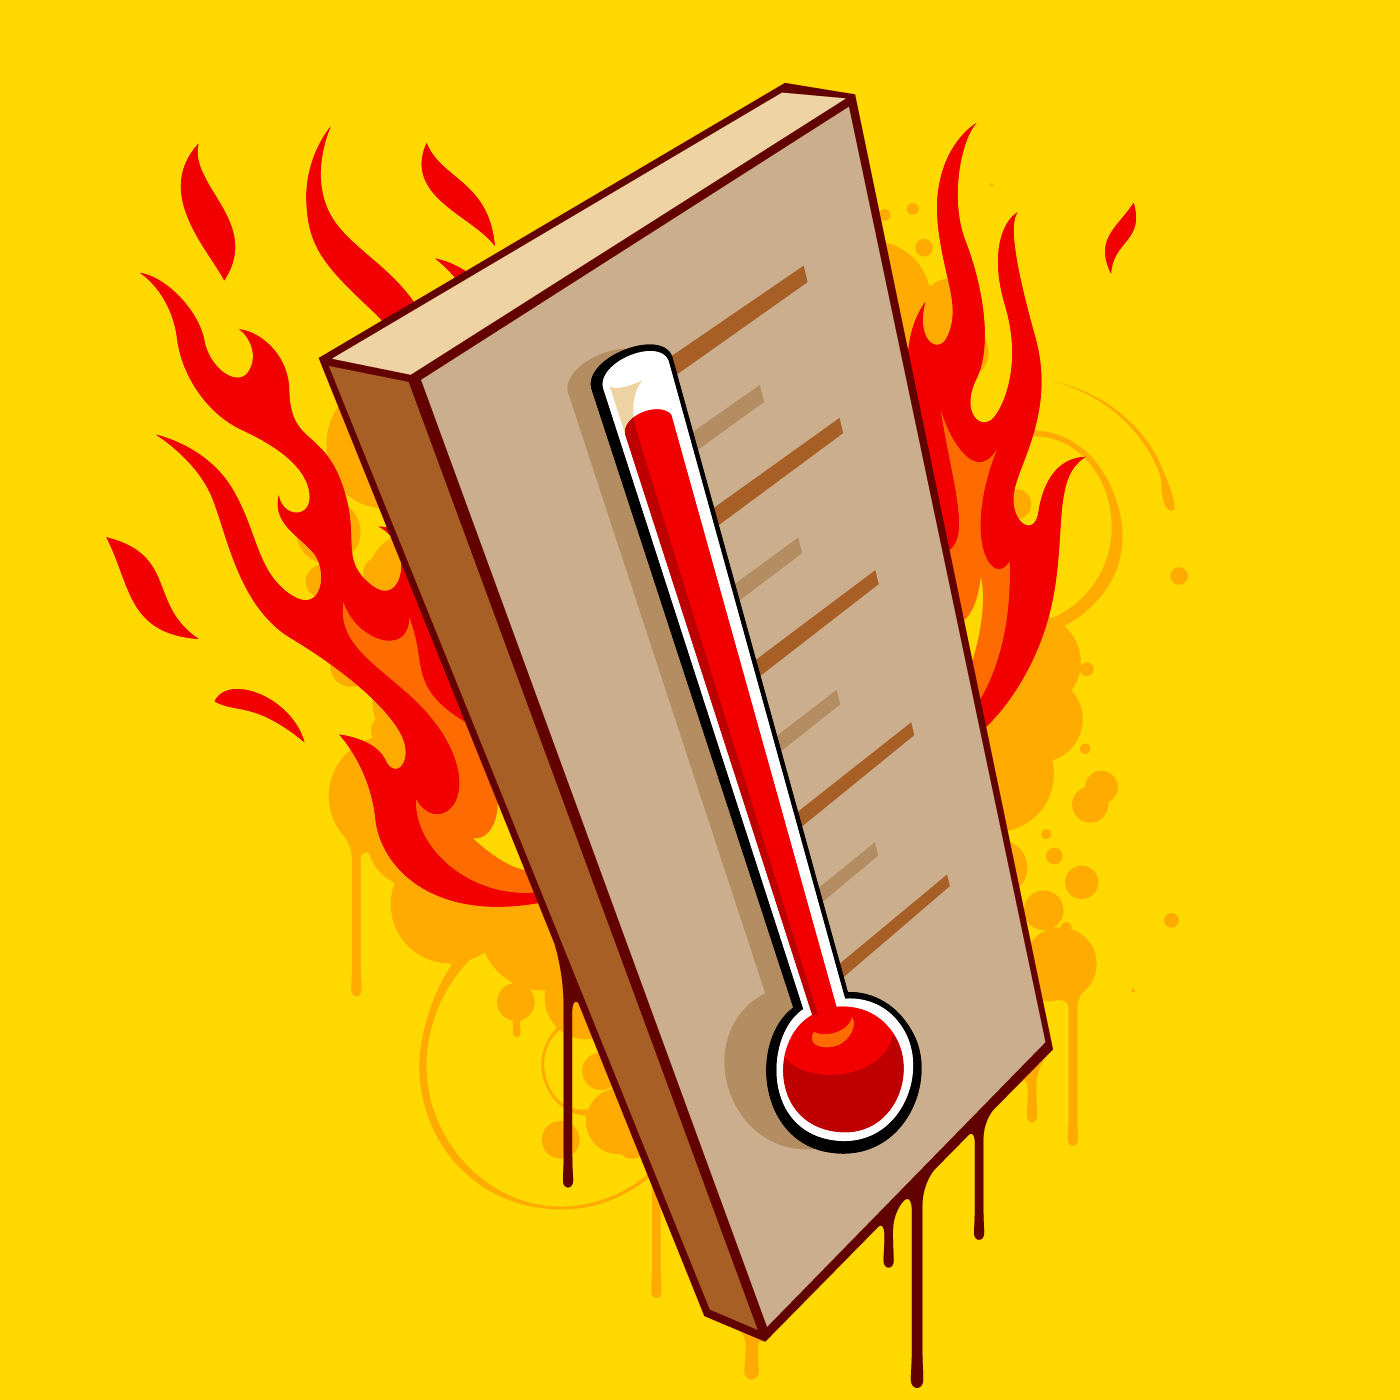 Clip Arts Related To : heat stroke clipart. view all Heat Stress Cartoons)....